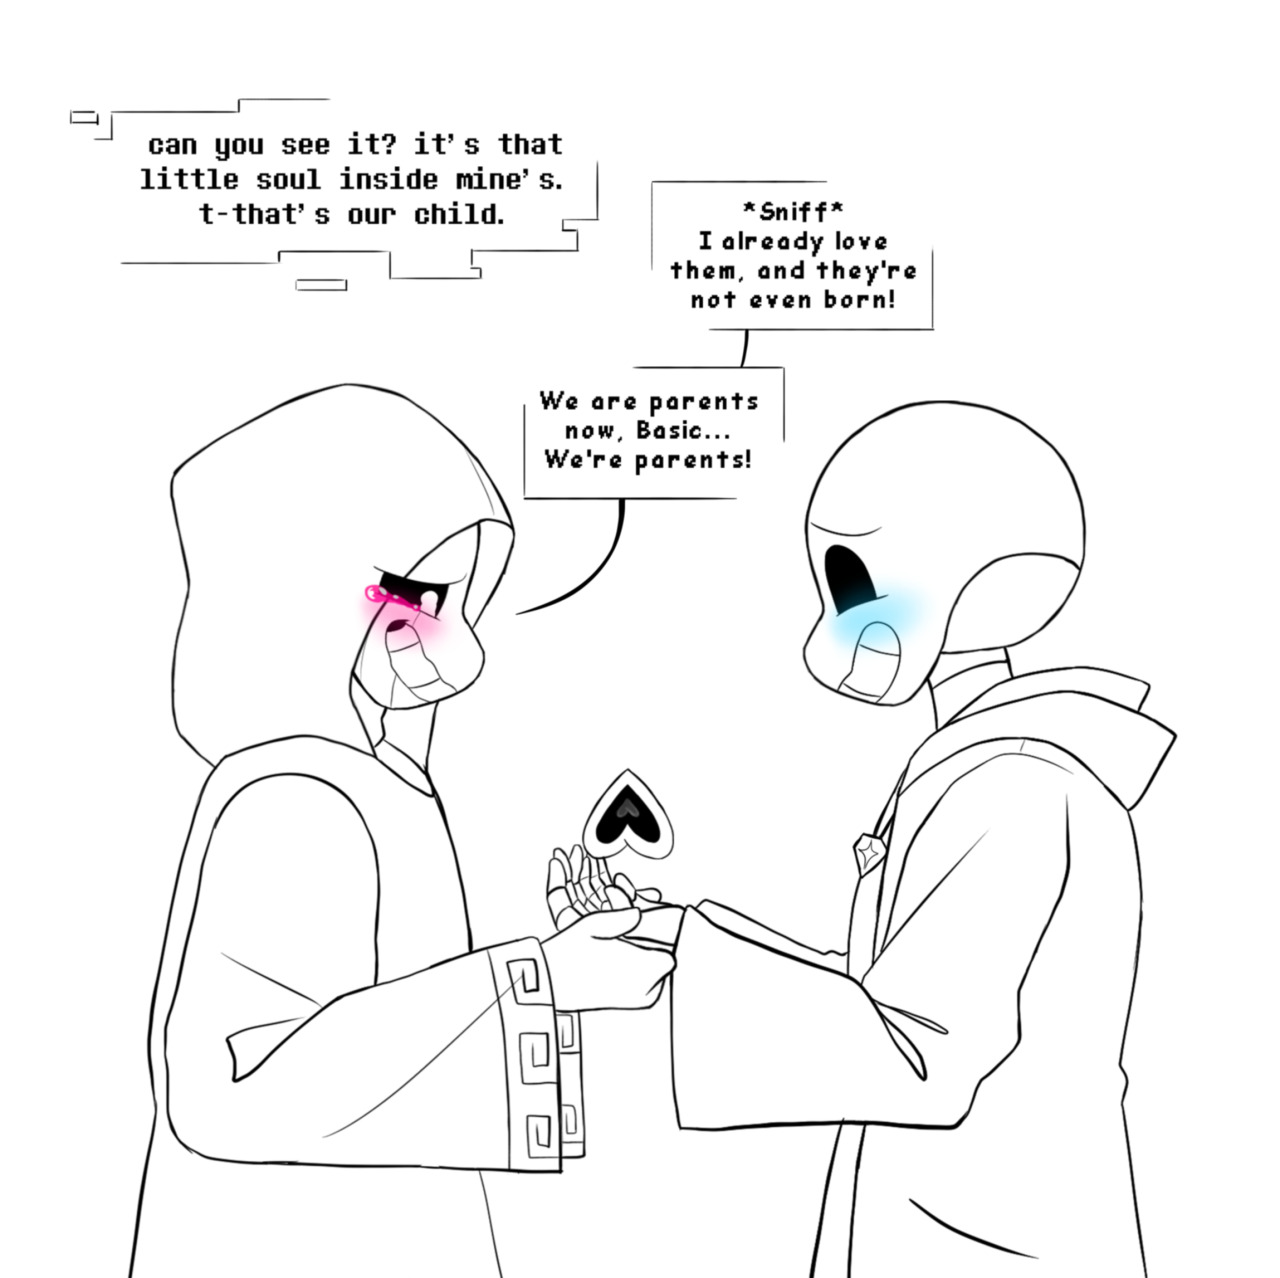 One-sided Relationship (Yandere Reaper Sans x reader